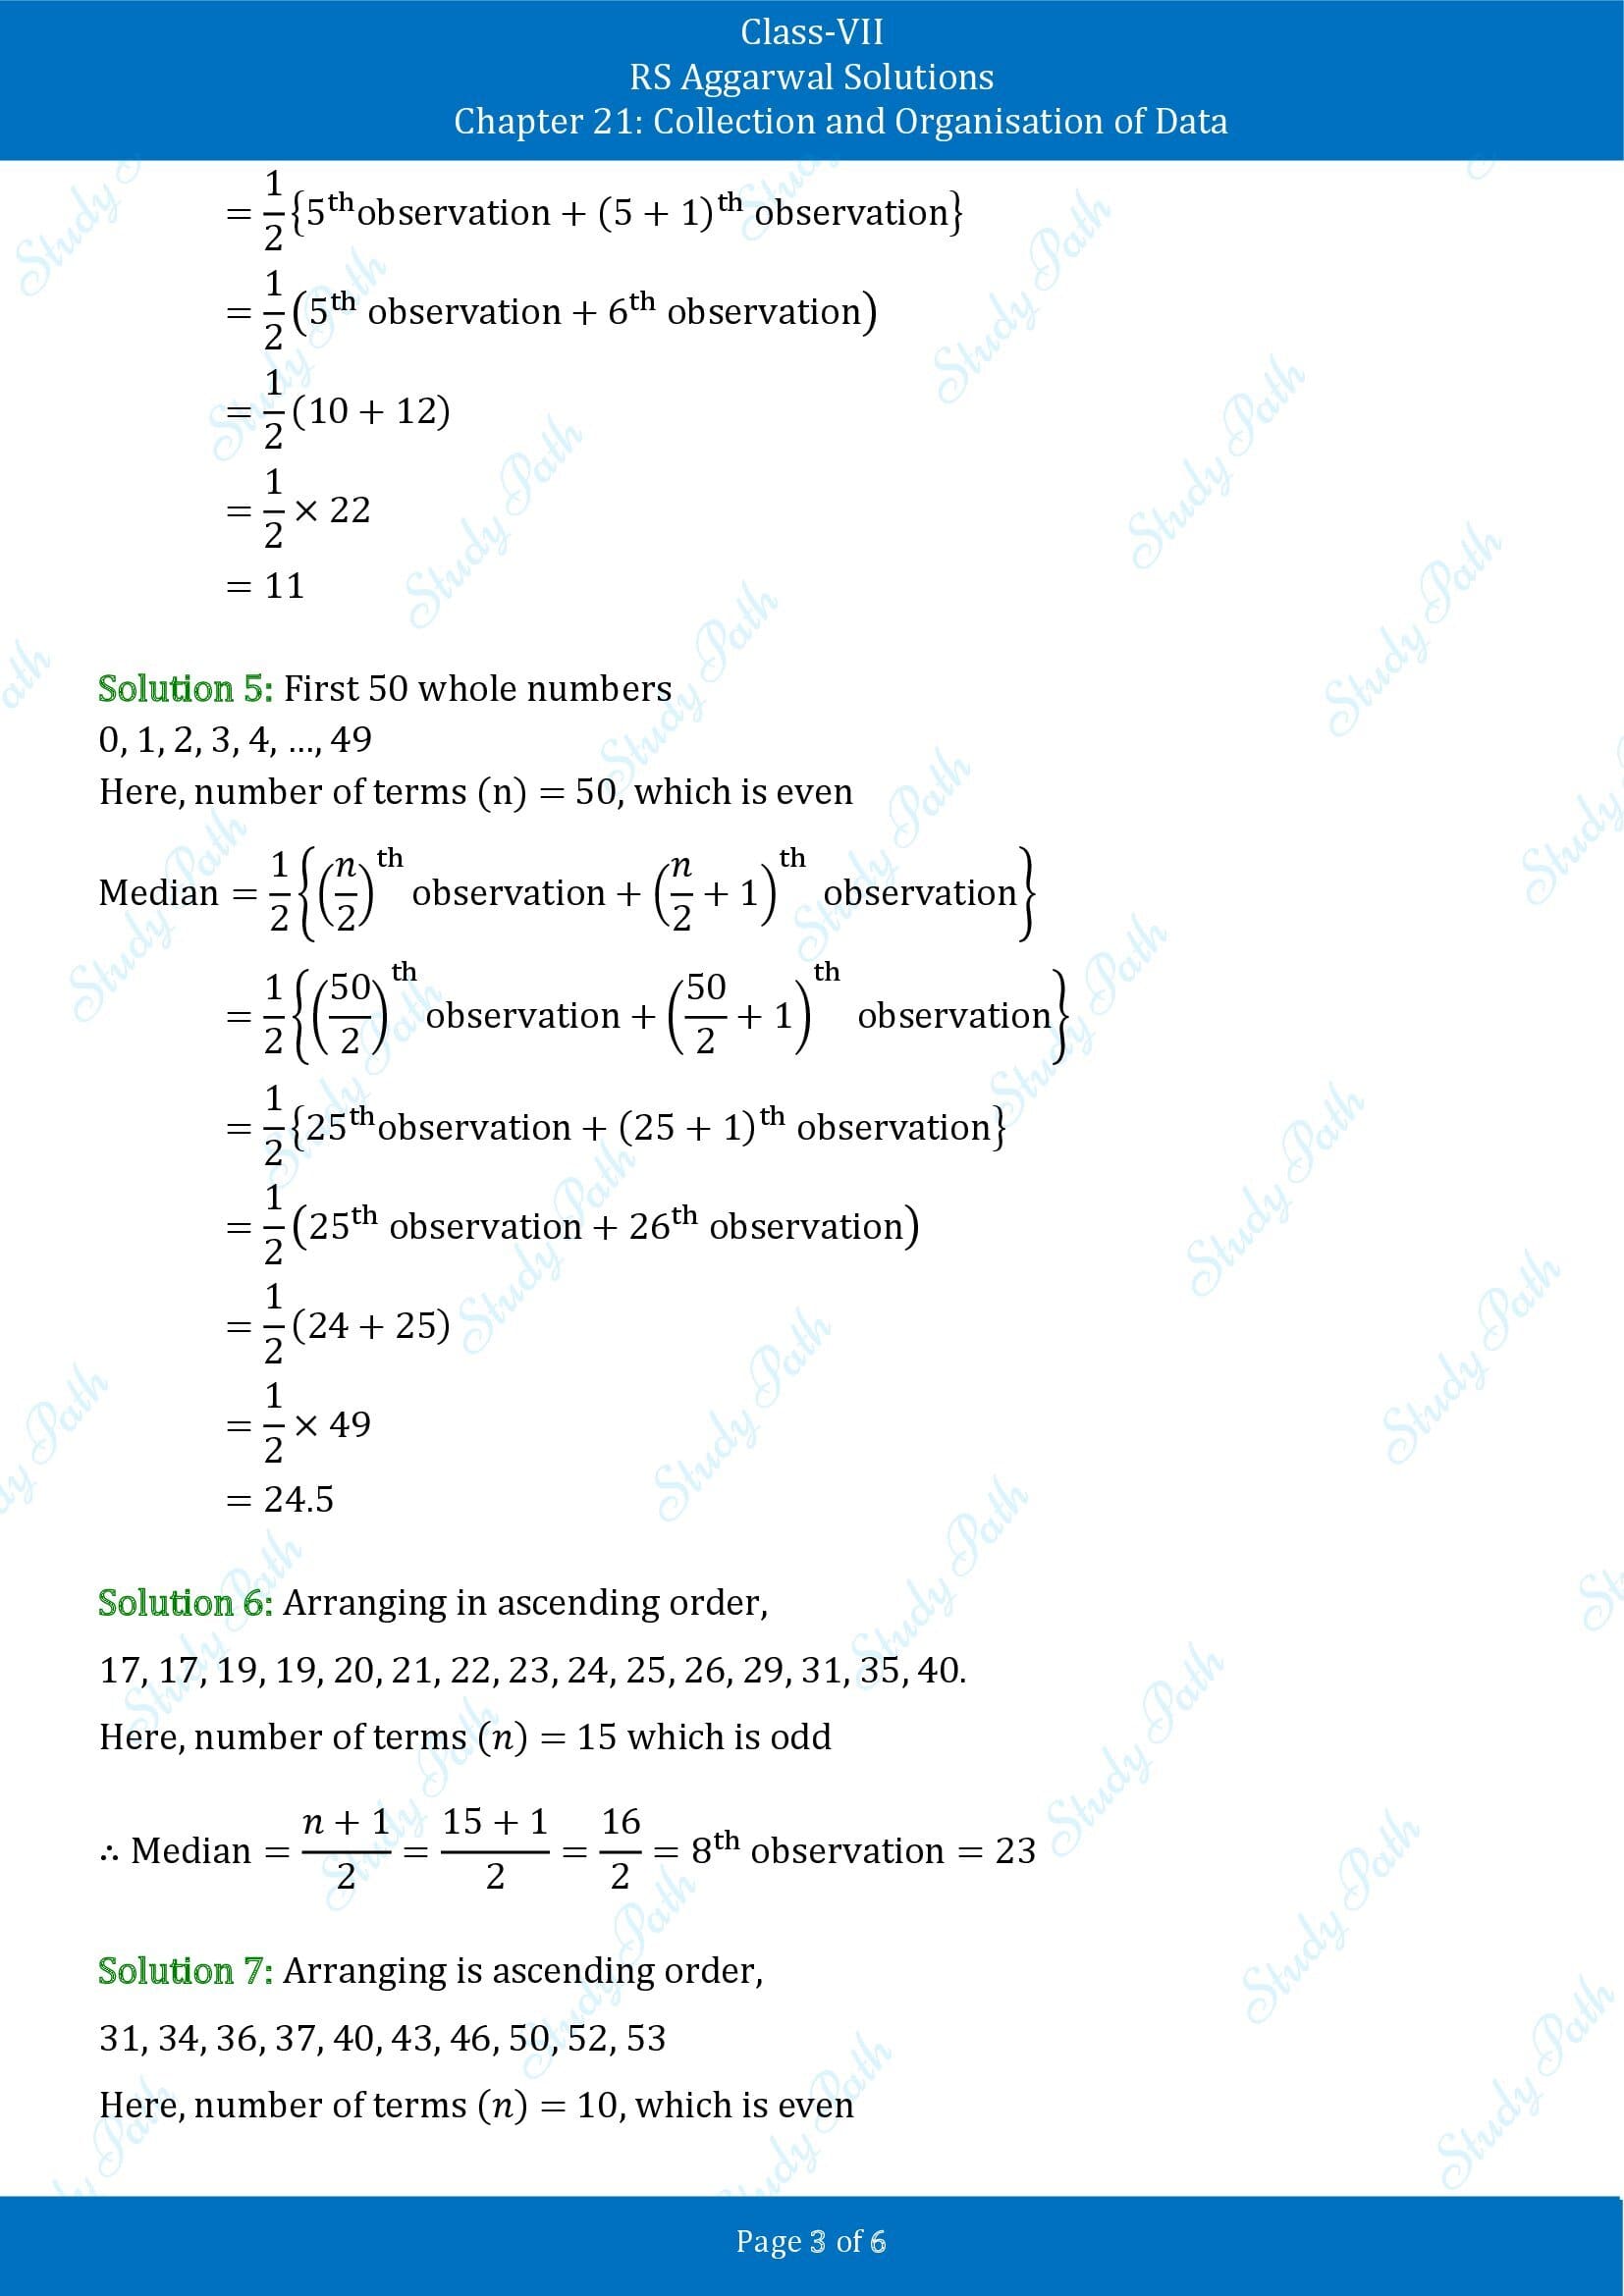 RS Aggarwal Solutions Class 7 Chapter 21 Collection and Organisation of Data Exercise 21B 00003